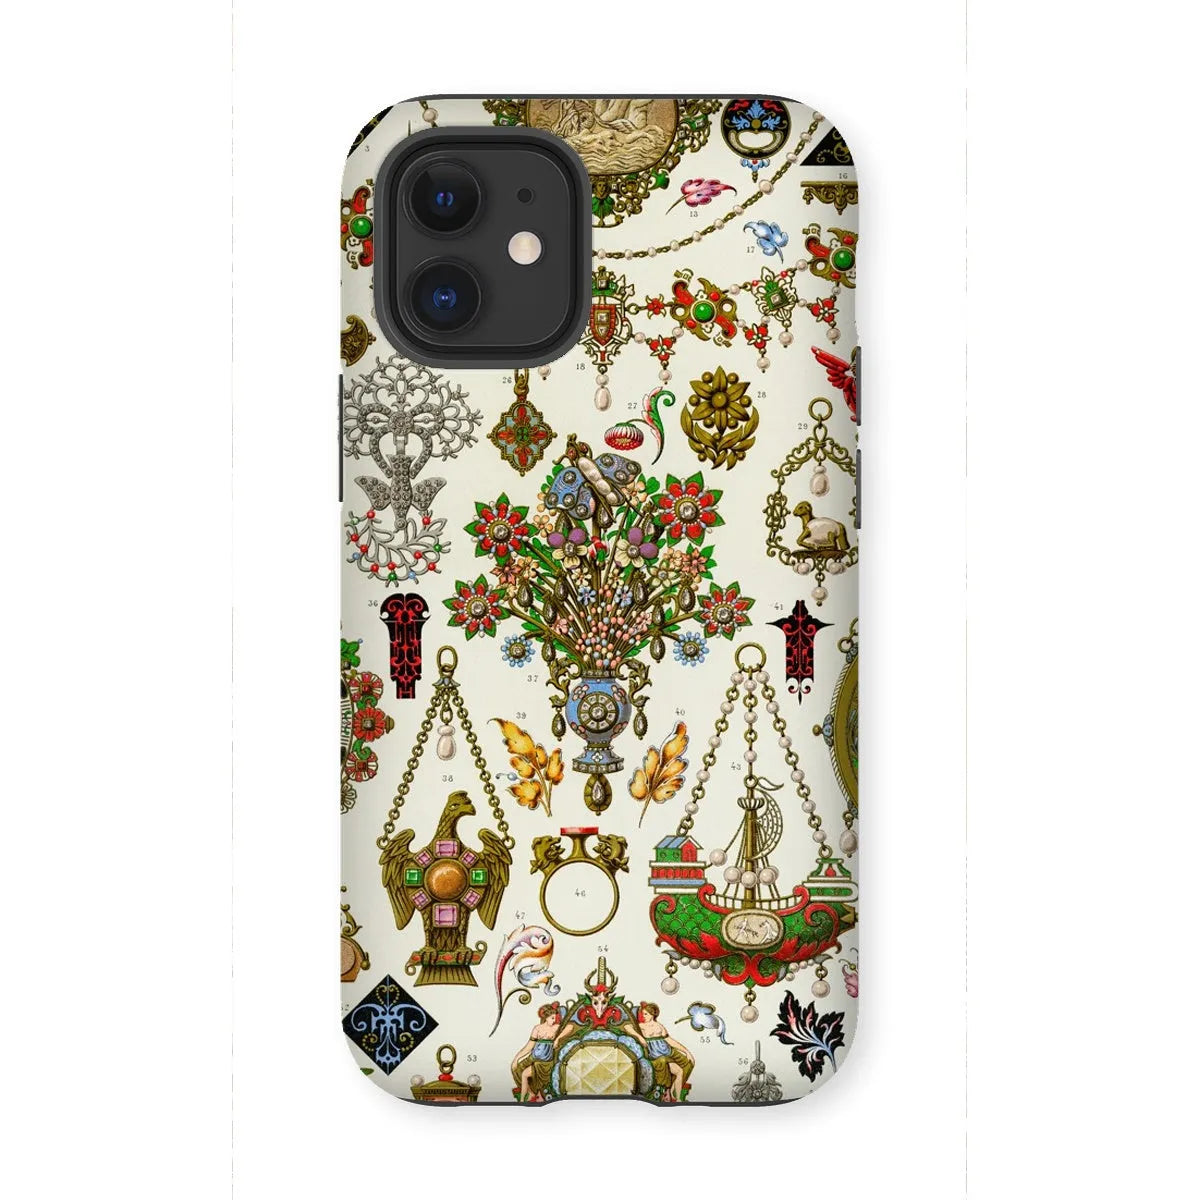 French Jewelry By Auguste Racinet Tough Phone Case - Iphone 12 Mini / Matte - Mobile Phone Cases - Aesthetic Art